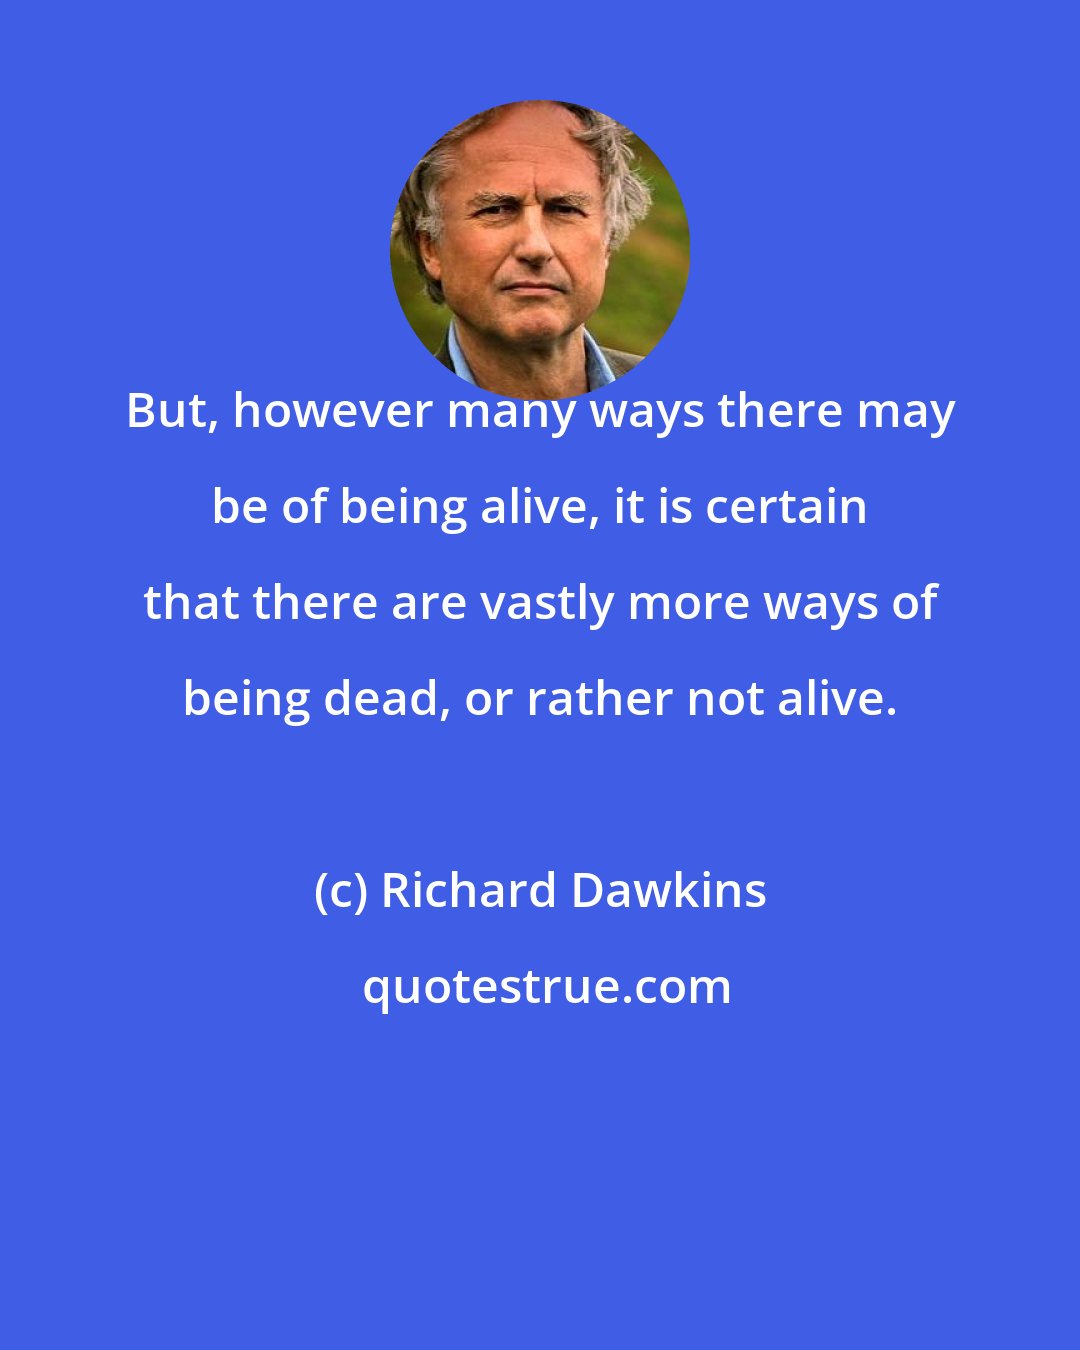 Richard Dawkins: But, however many ways there may be of being alive, it is certain that there are vastly more ways of being dead, or rather not alive.